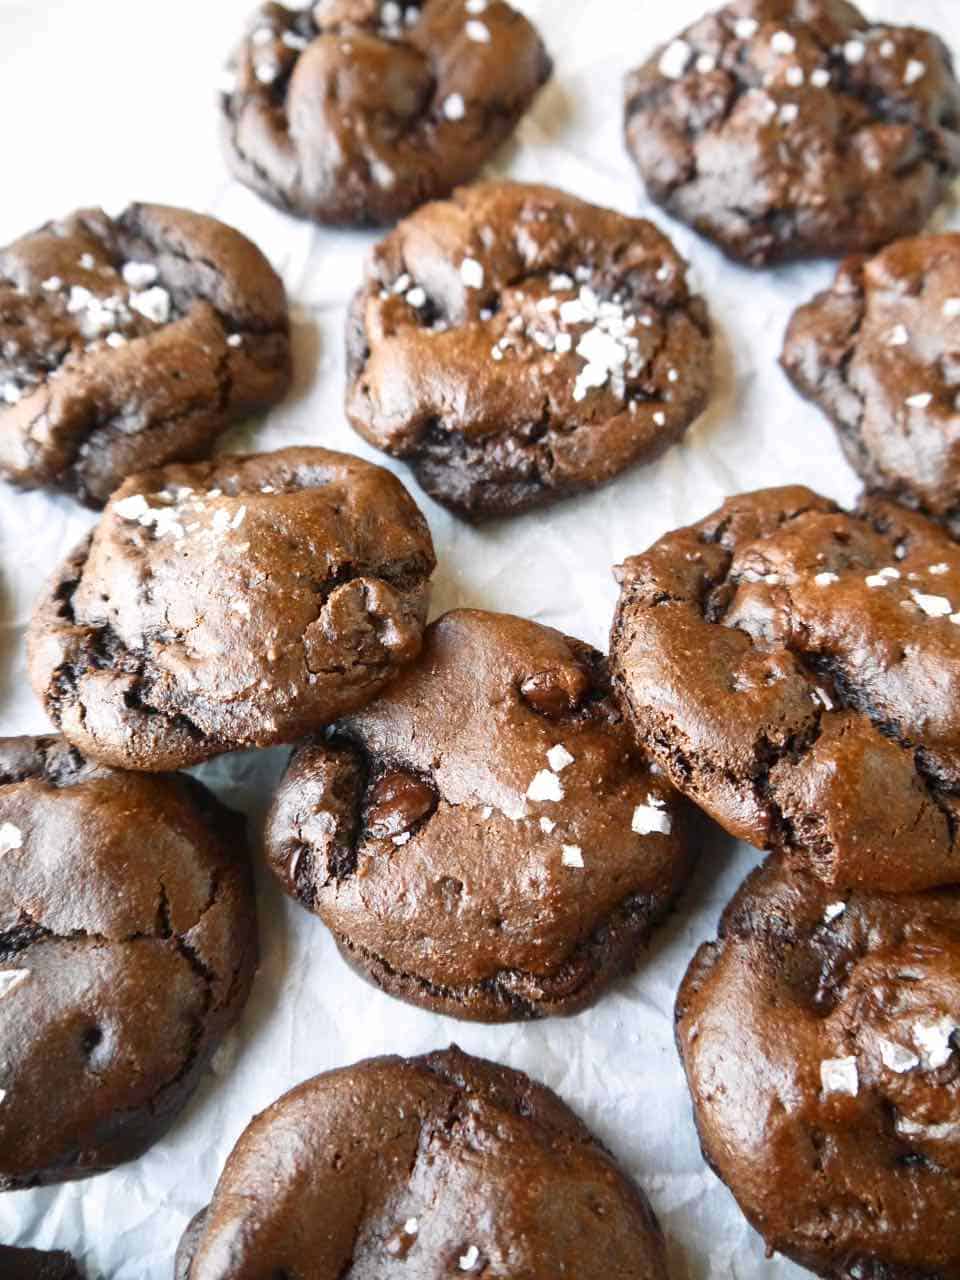 Freshly baked healthy double chocolate chip cookies.